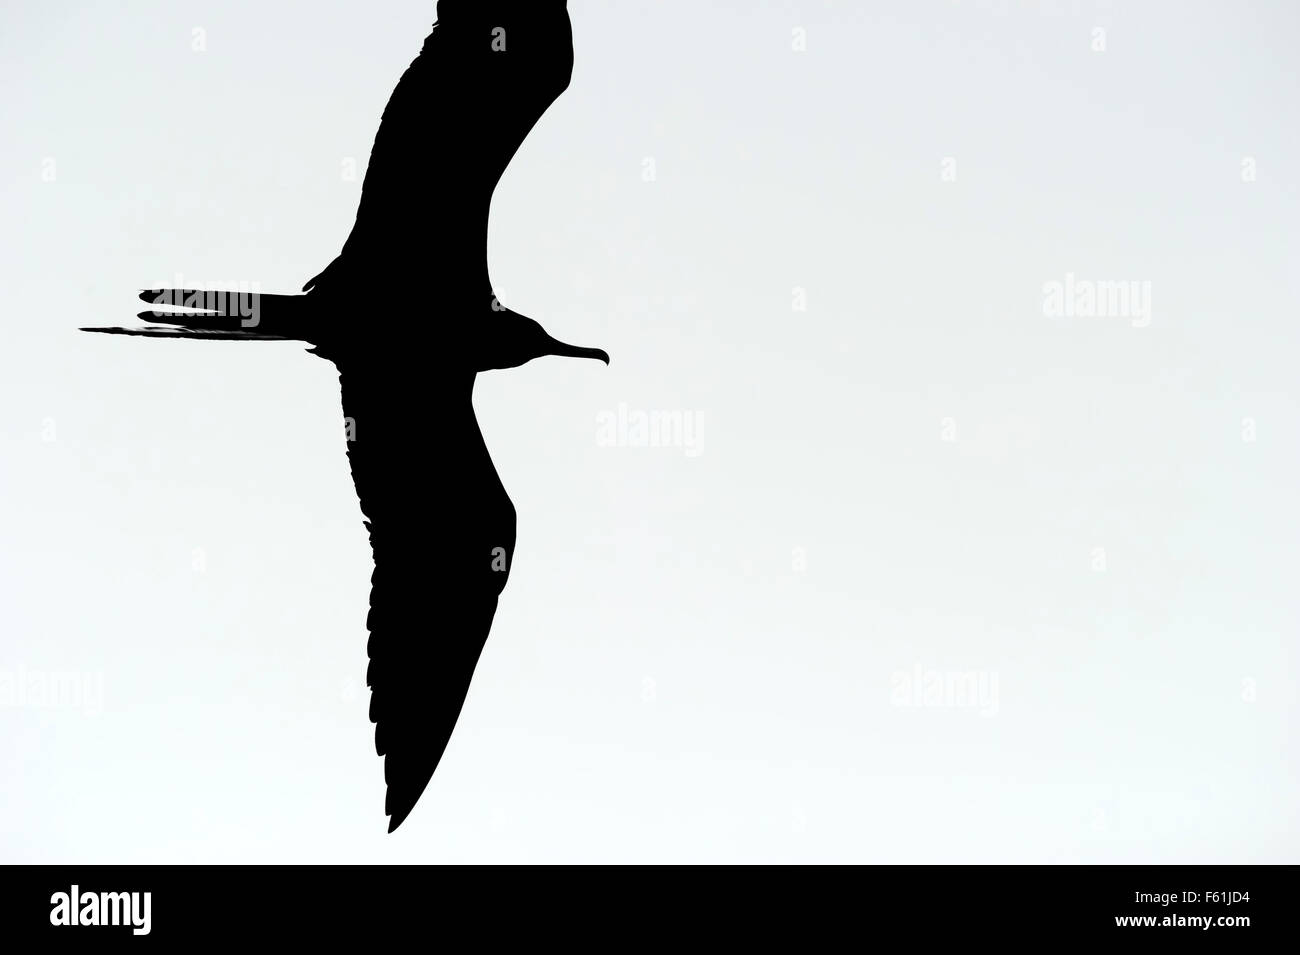 Bird silhouette flying is a detailed image of a bird in flight on a white background. Stock Photo